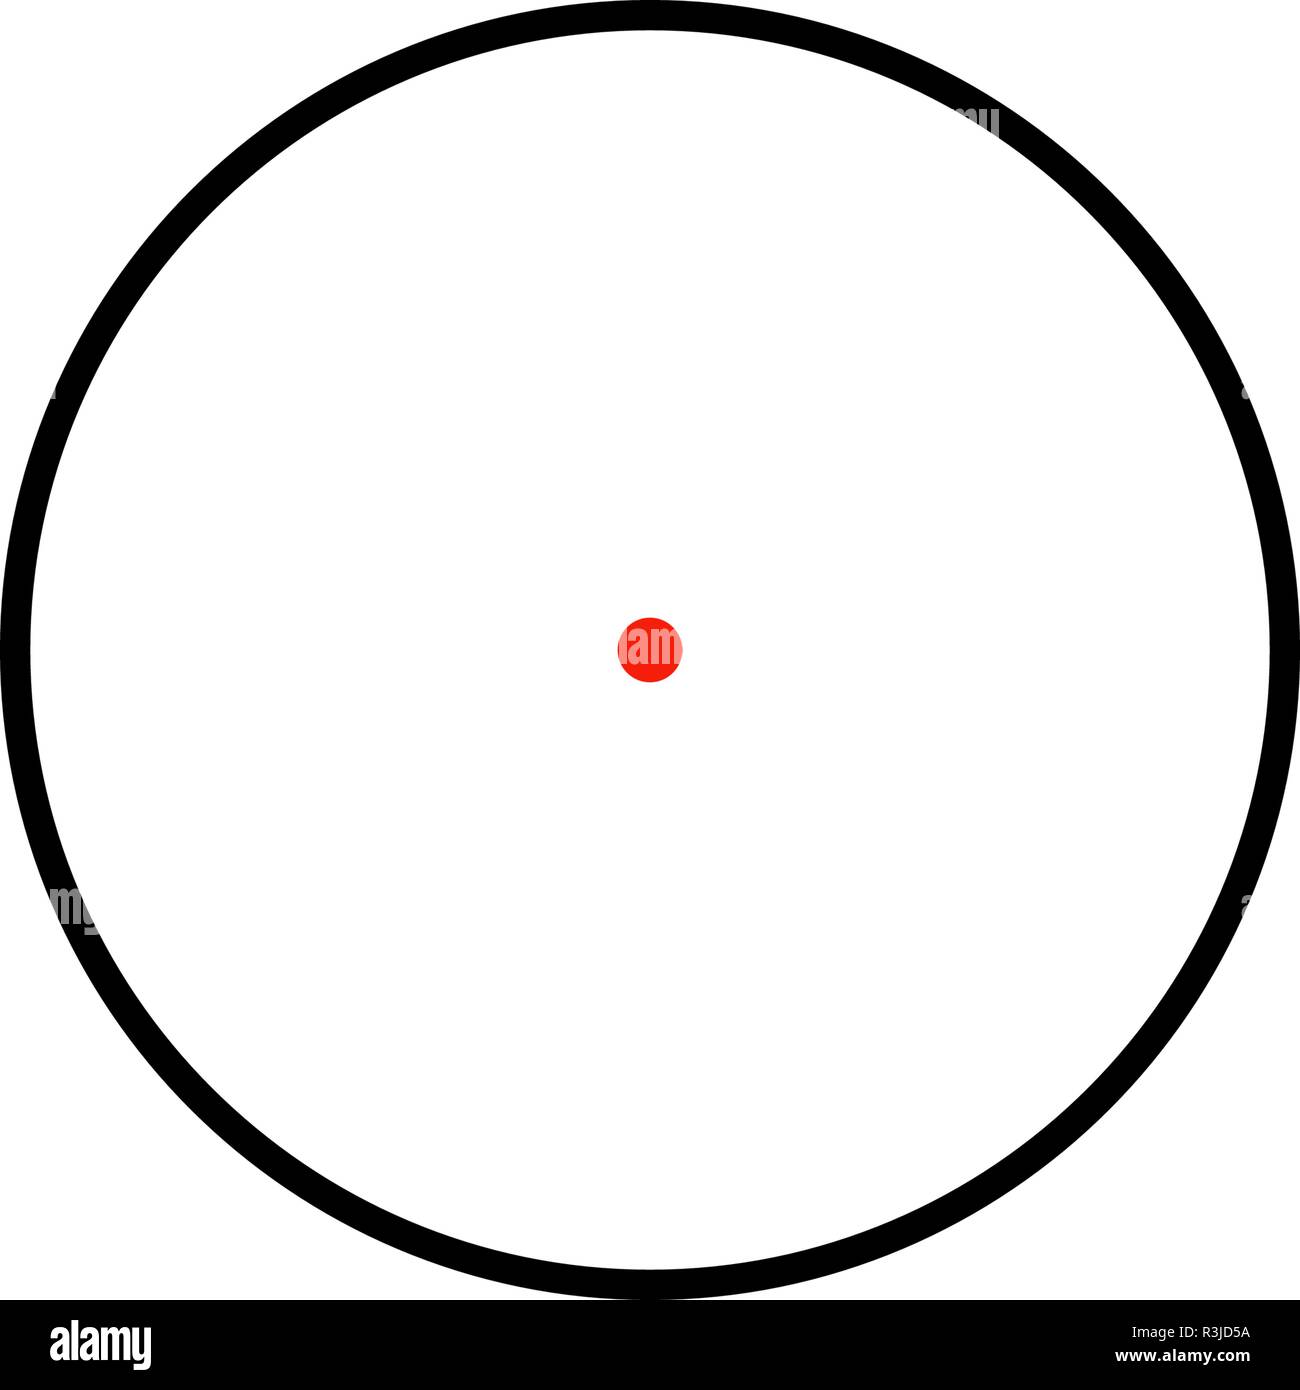 Simple sniper crosshairs with red aim dot Stock Vector